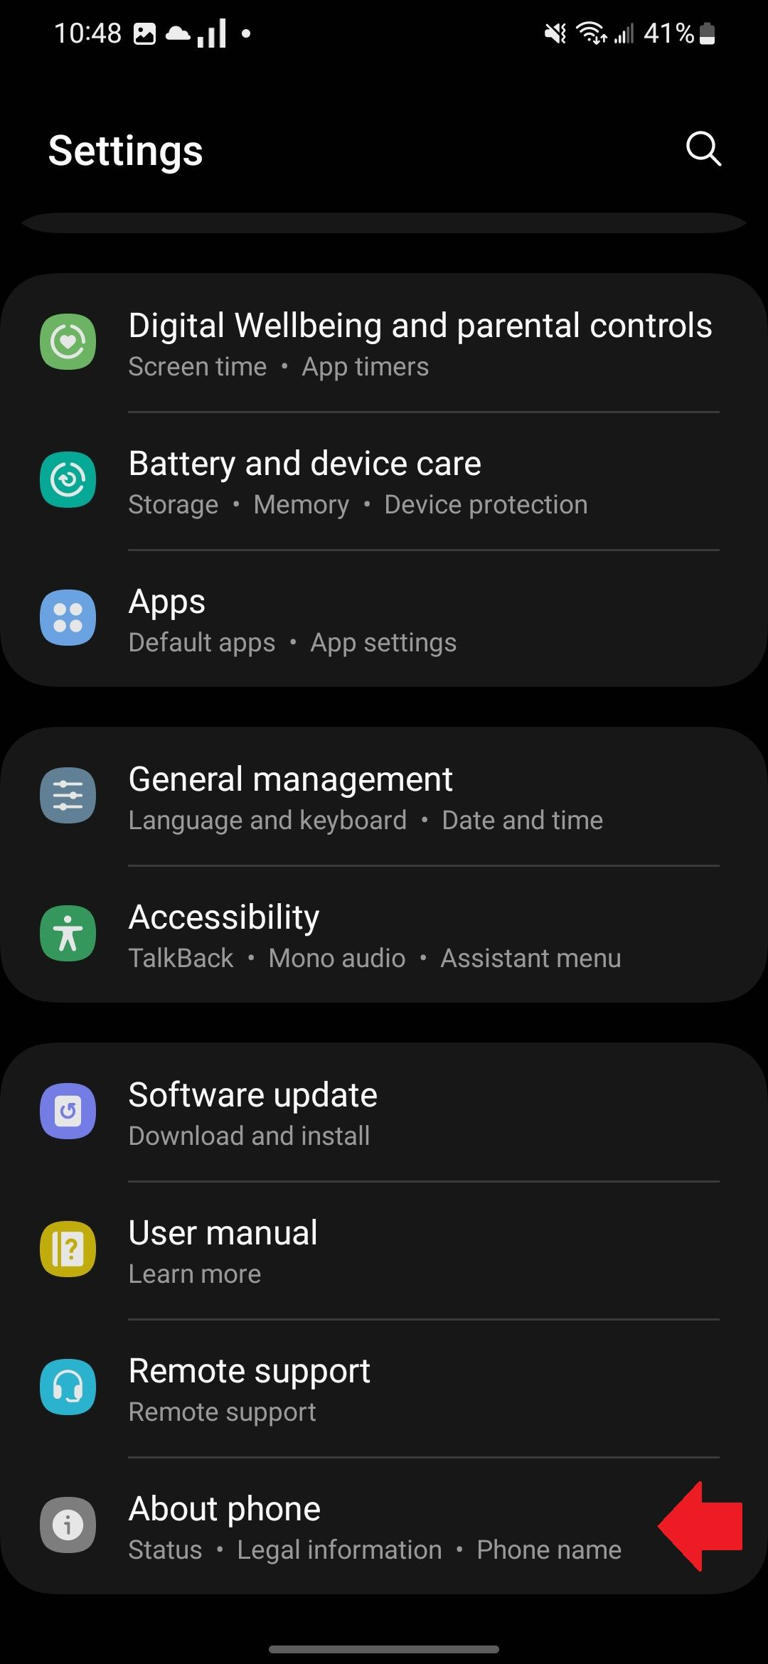 The Samsung Settings app with a red arrow pointing to the About phone section